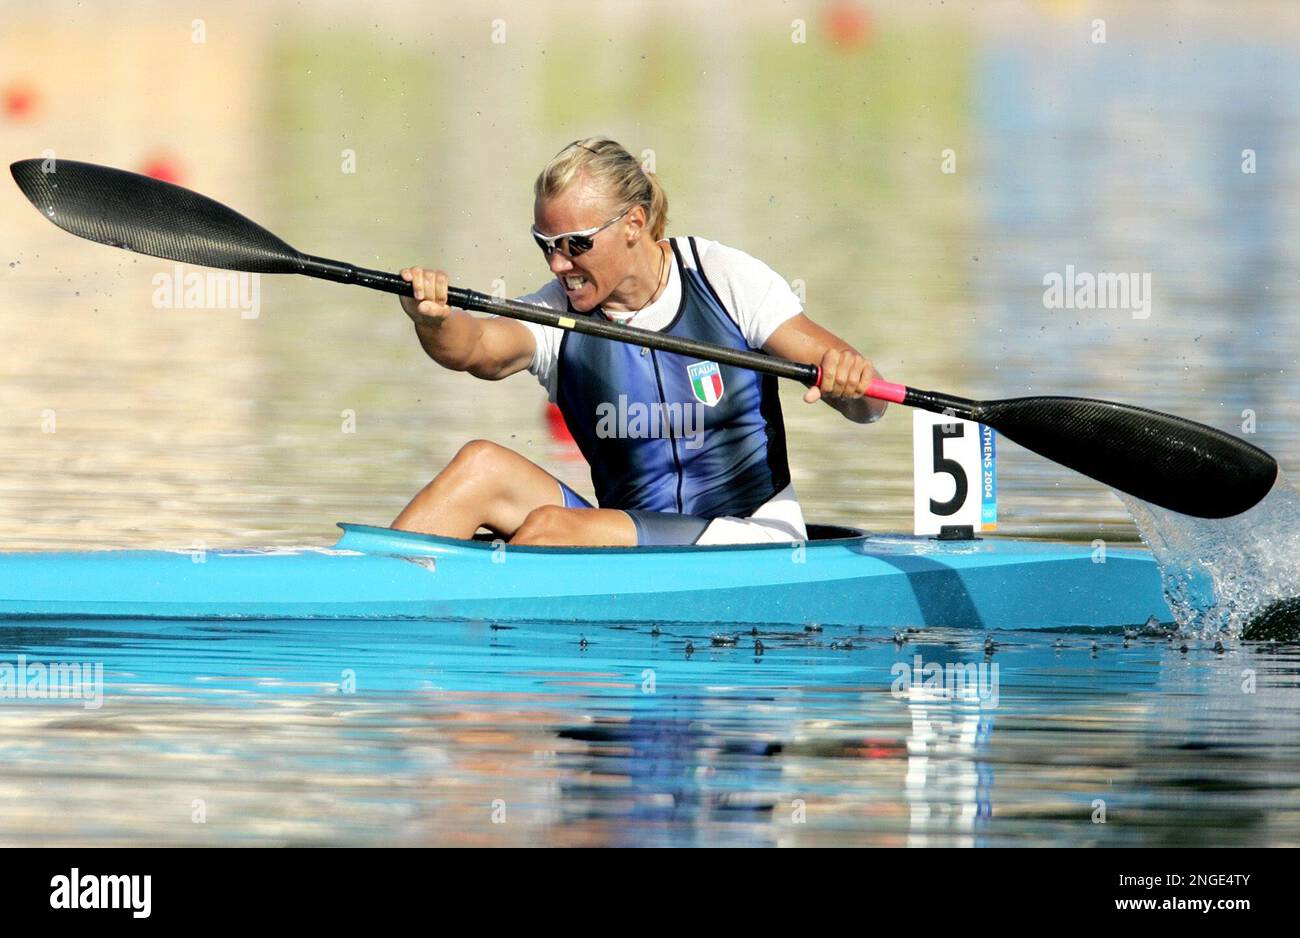 Defending Olympic champion Josefa Idem of Italy paddles to victory in her Women's K1 500 meter semifinal, during the kayak flatwater event at the 2004 Olympic Games in Schinias near Athens, Greece, Thursday, Aug. 26, 2004. (AP Photo/David Guttenfelder) Stock Photo